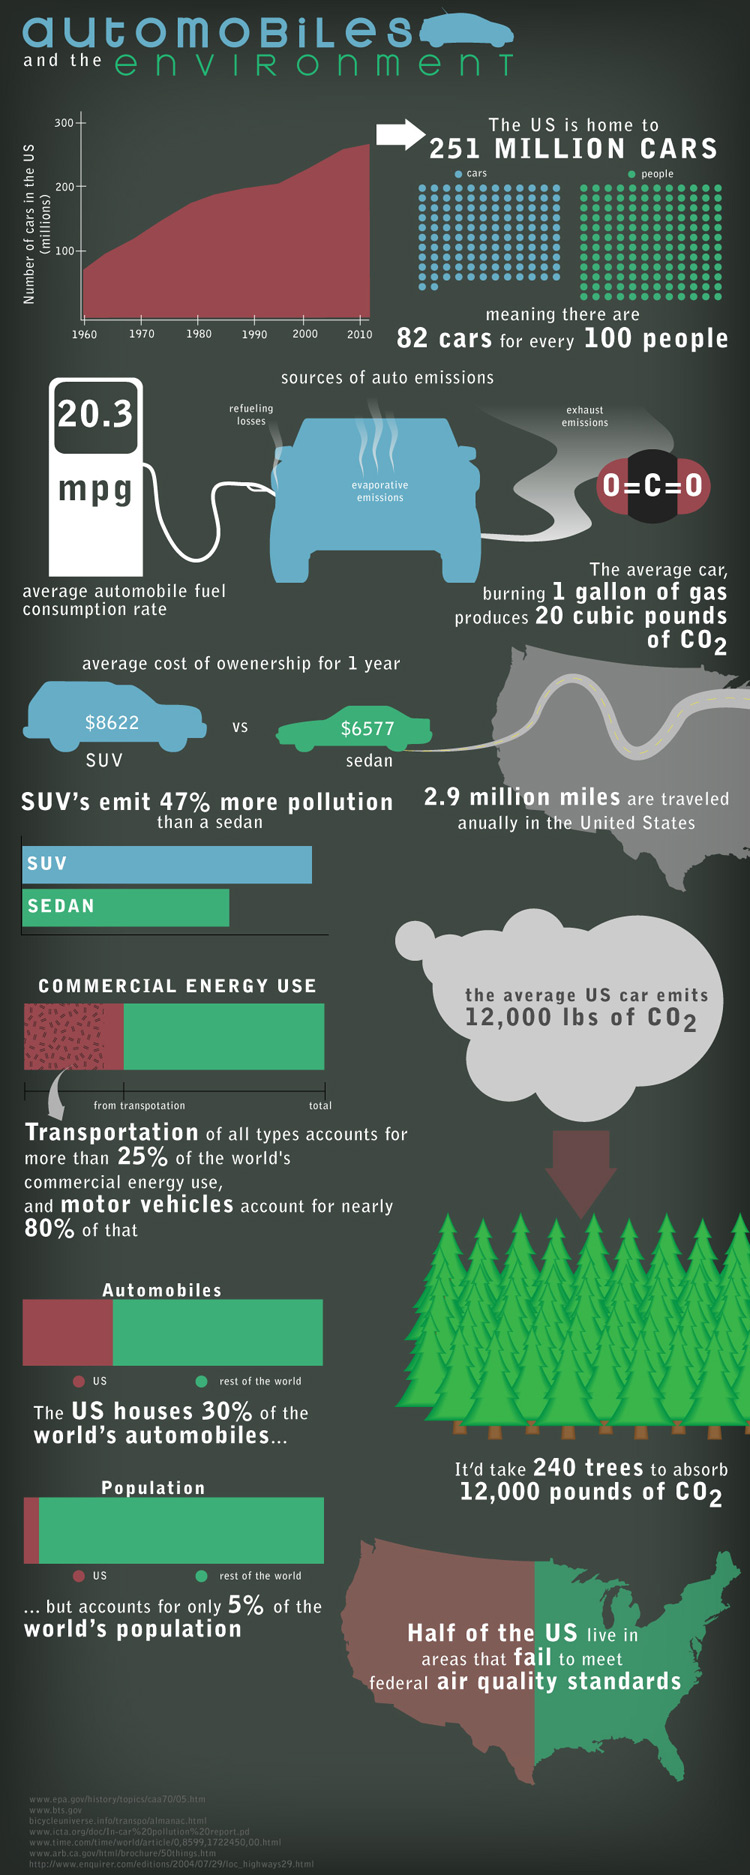 Automobiles and the environment